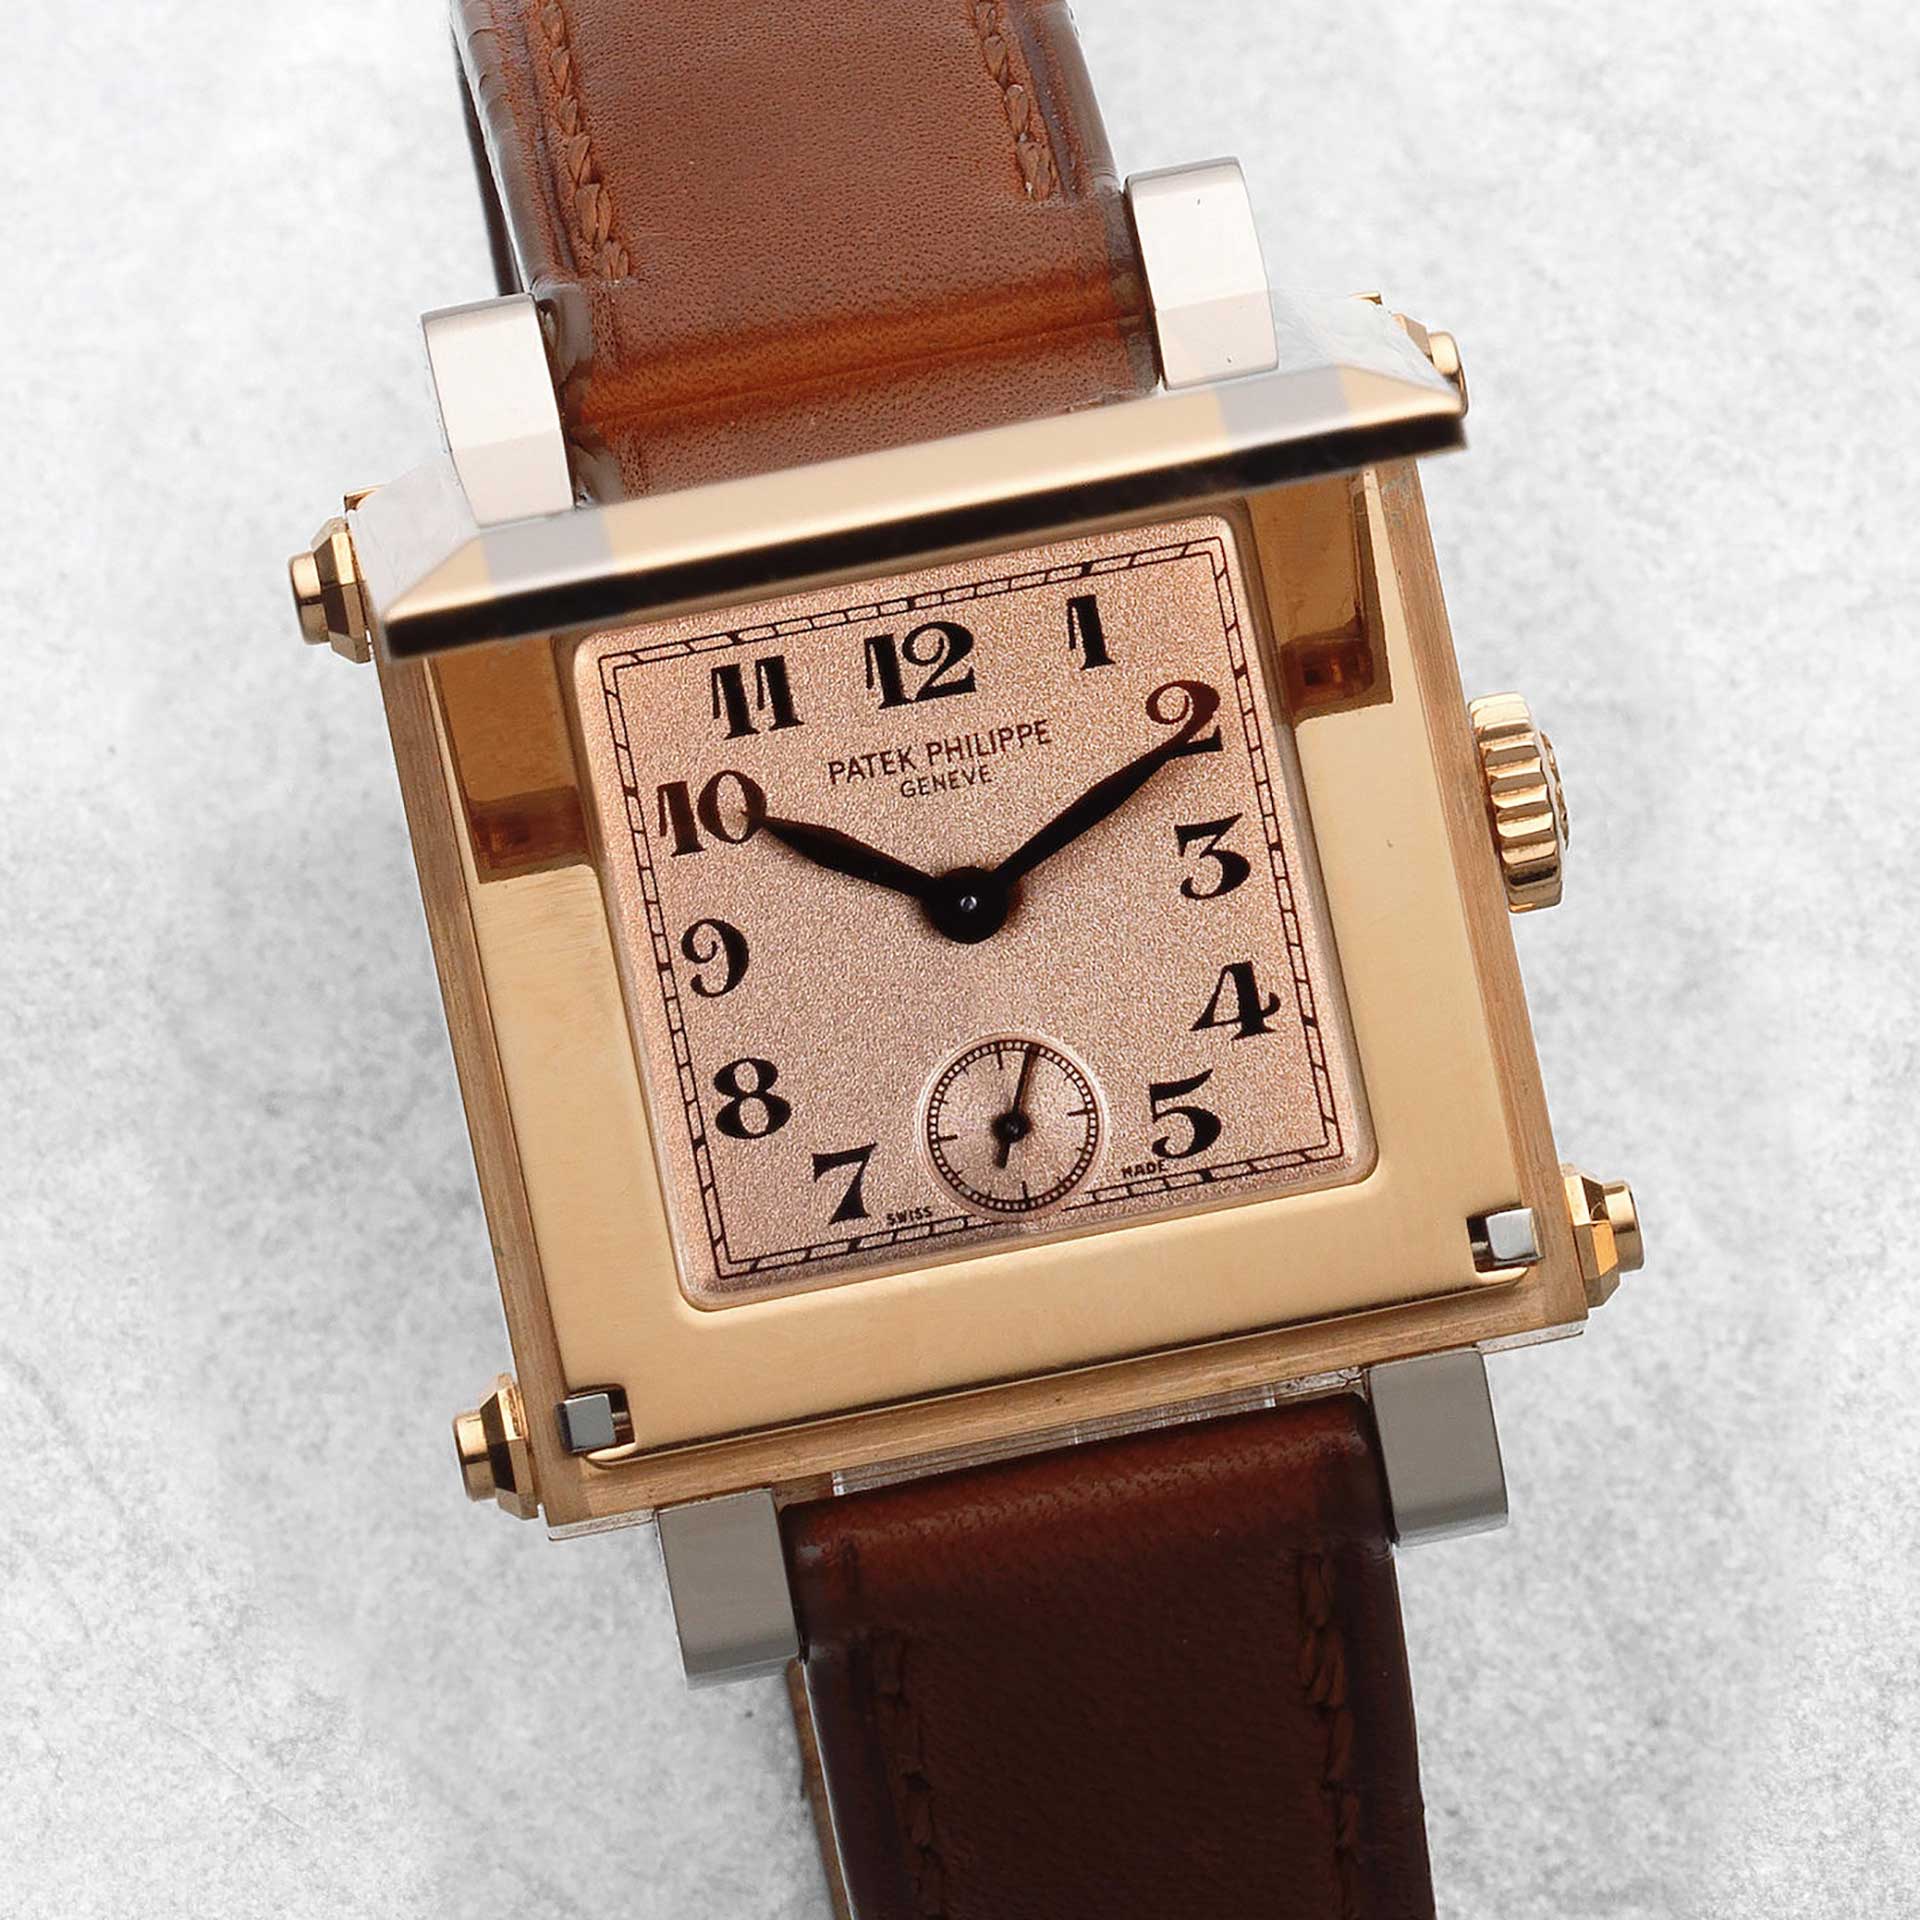 LOT 30 Patek Philippe 18k Two Colour Gold Manual Wind Square Wristwatch With Concealed Dial